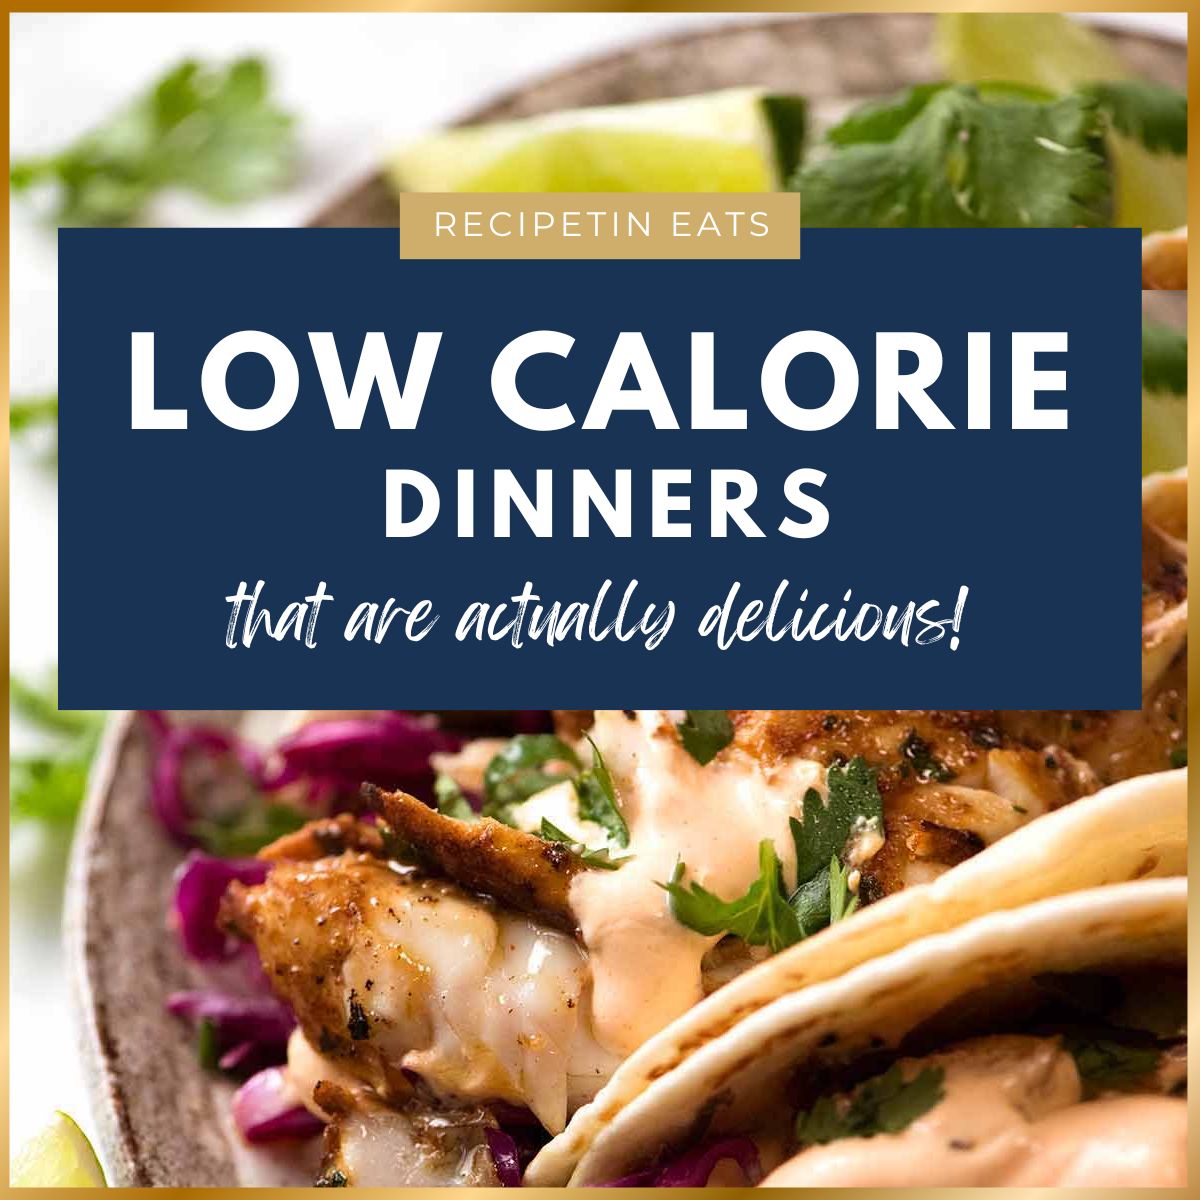 Low calorie dinners - 500 calories or less for a complete meal